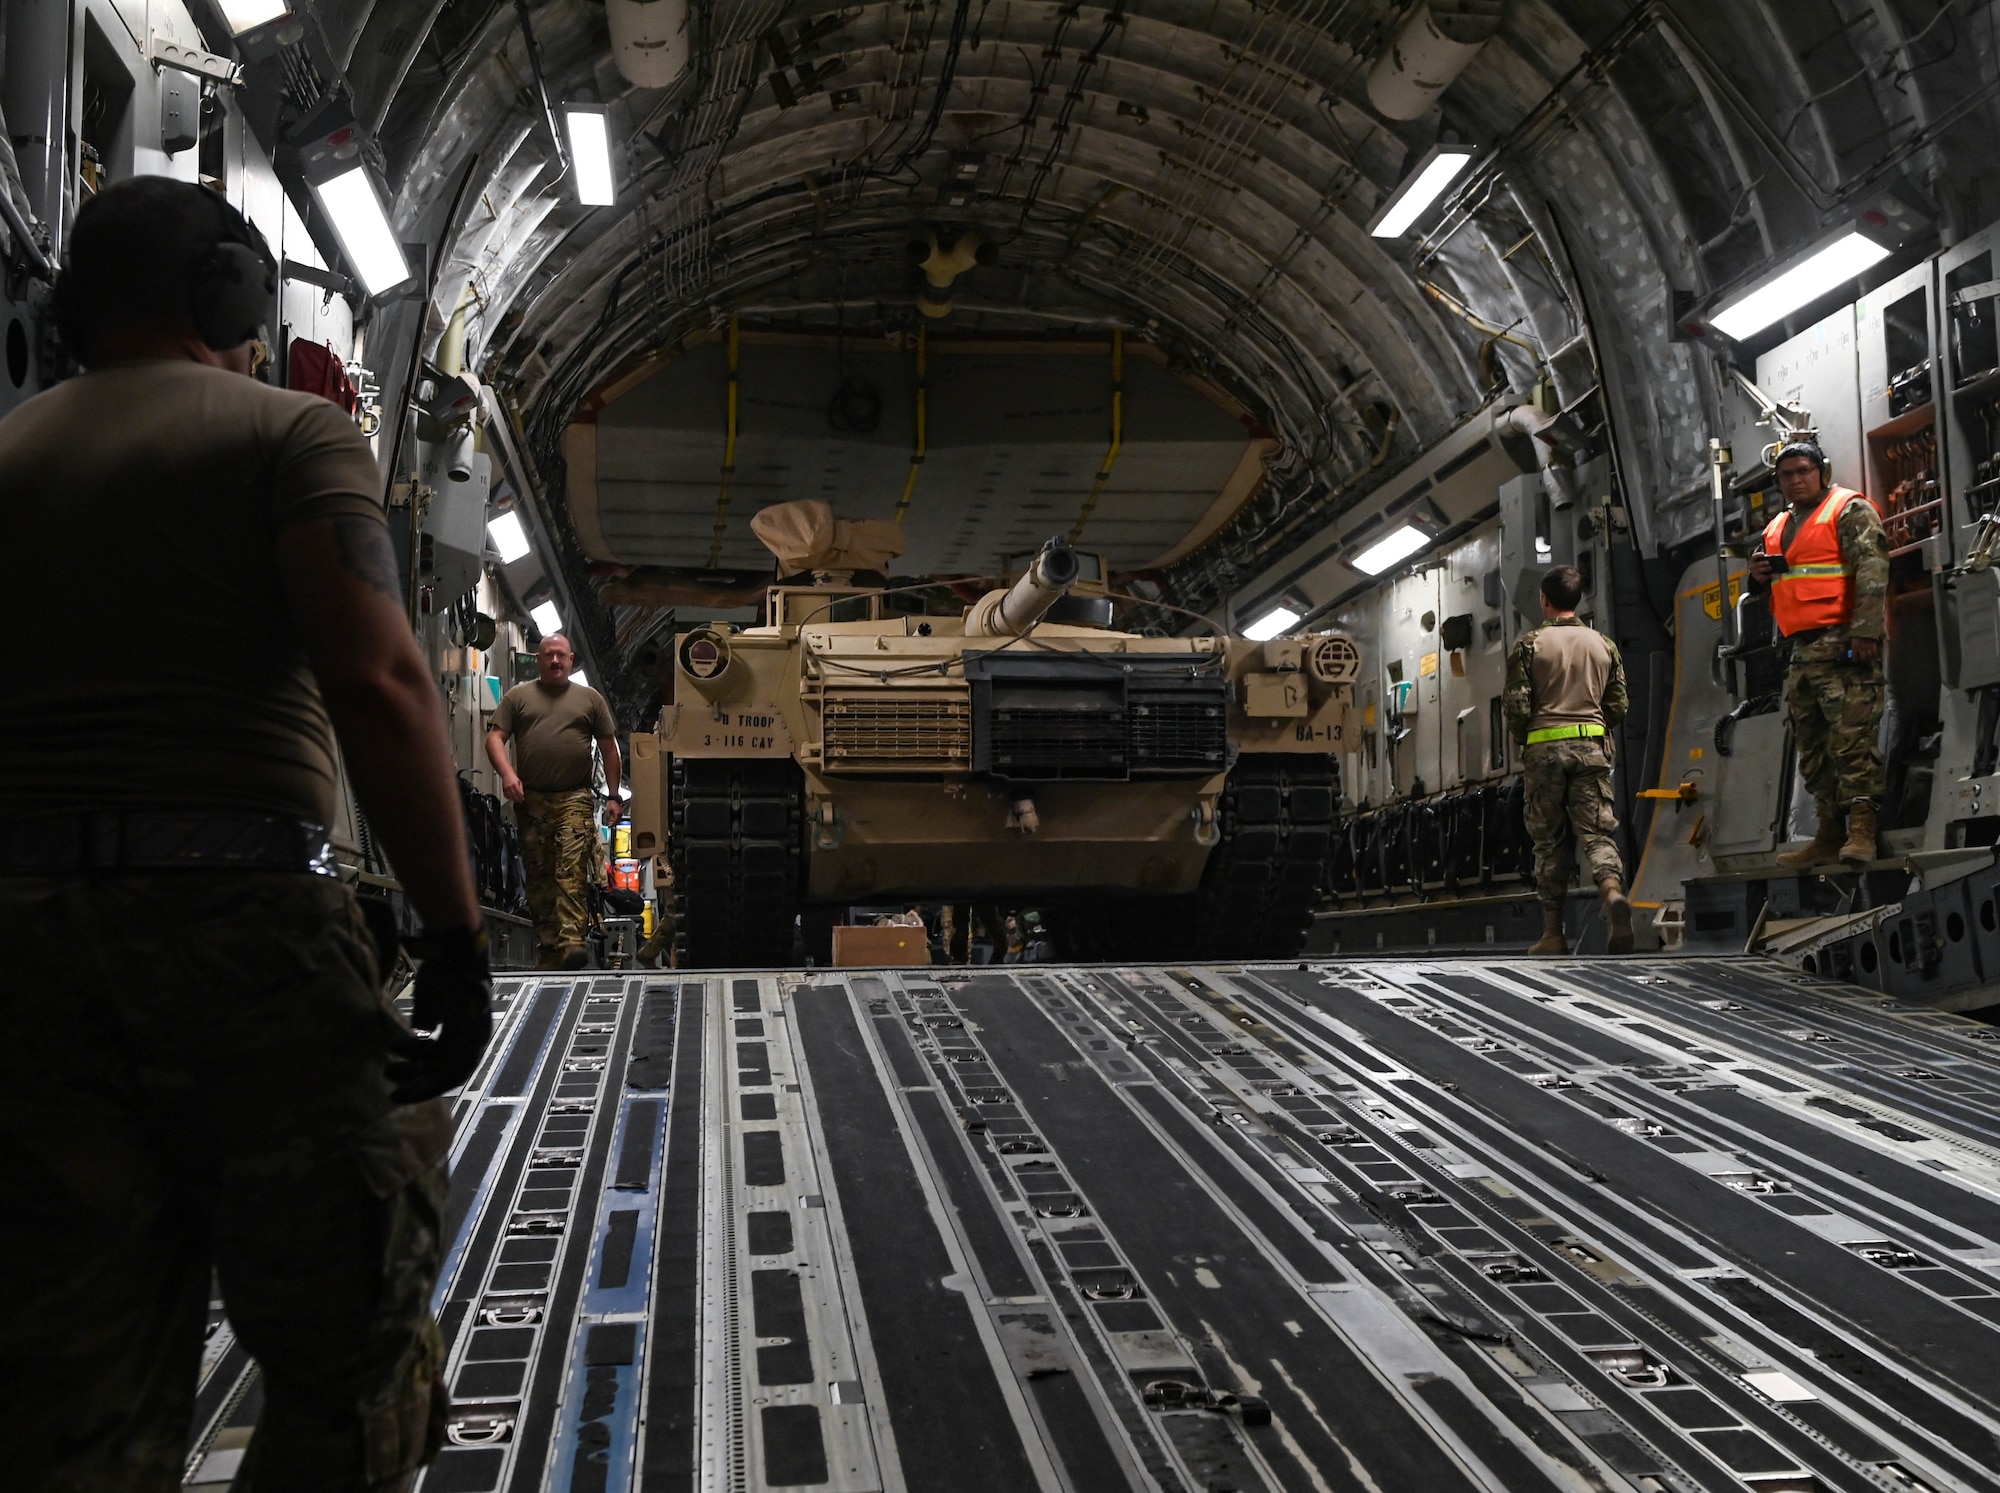 An M-1/A2 Abrams main battle tank is loaded onto an 816th Expeditionary Airlift Squadron C-17 Globemaster III aircraft Aug 27, 2022 at Ali Al Salem Air Base, Kuwait. The tank was transported to an undisclosed location. (U.S. Air National Guard photo by Master Sgt. Michael J. Kelly)